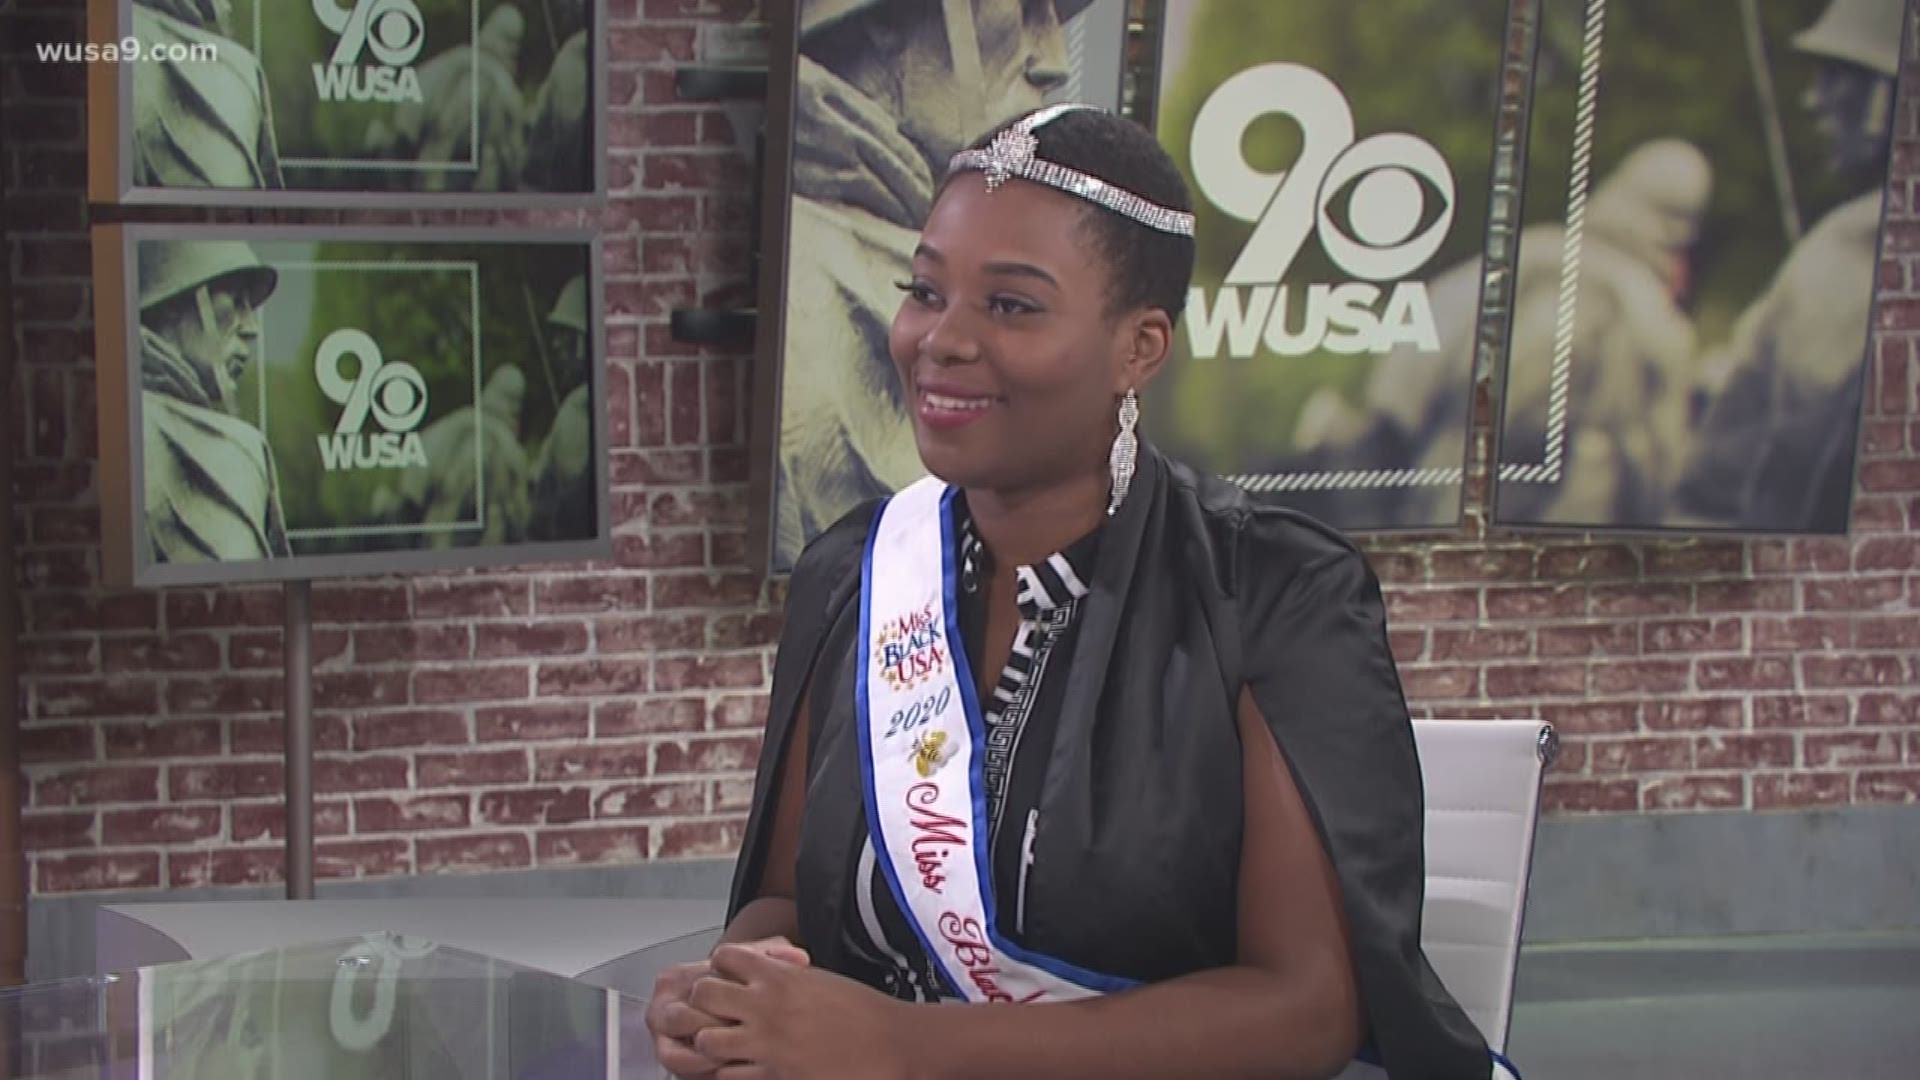 Harvard grad student Amini Bonane is celebrating her new role as Miss Black DC USA with a coronation ceremony and charity fundraiser.